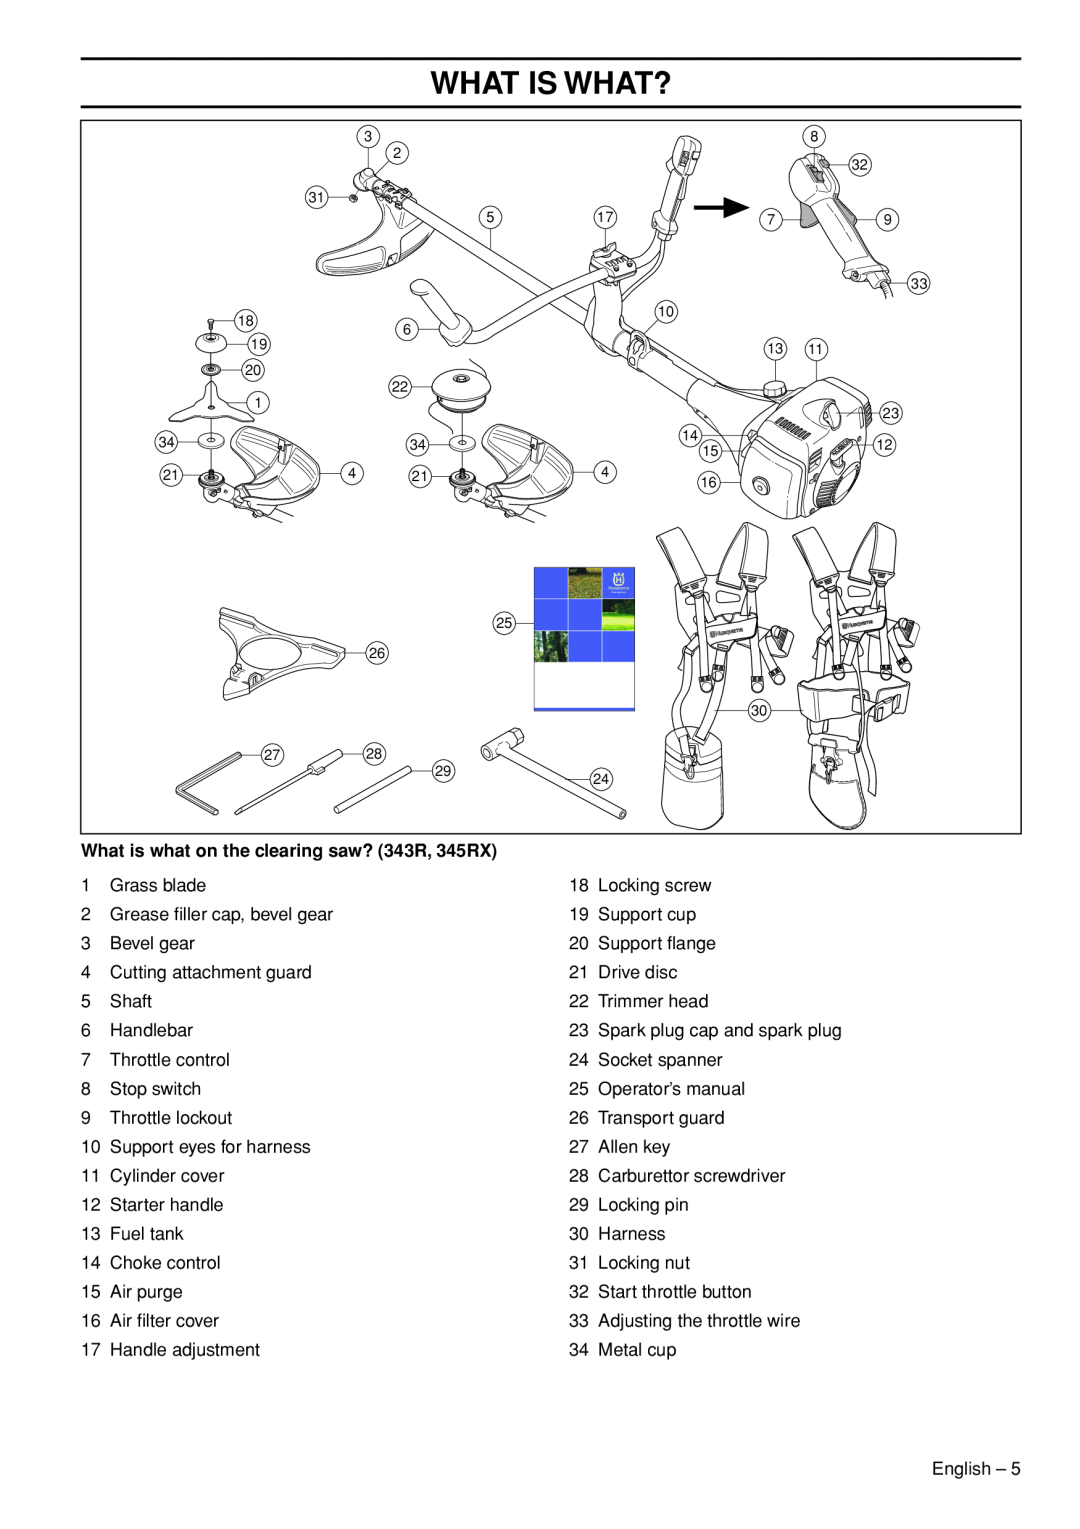 Husqvarna 335LX manual What Is What?, What is what on the clearing saw? 343R, 345RX 